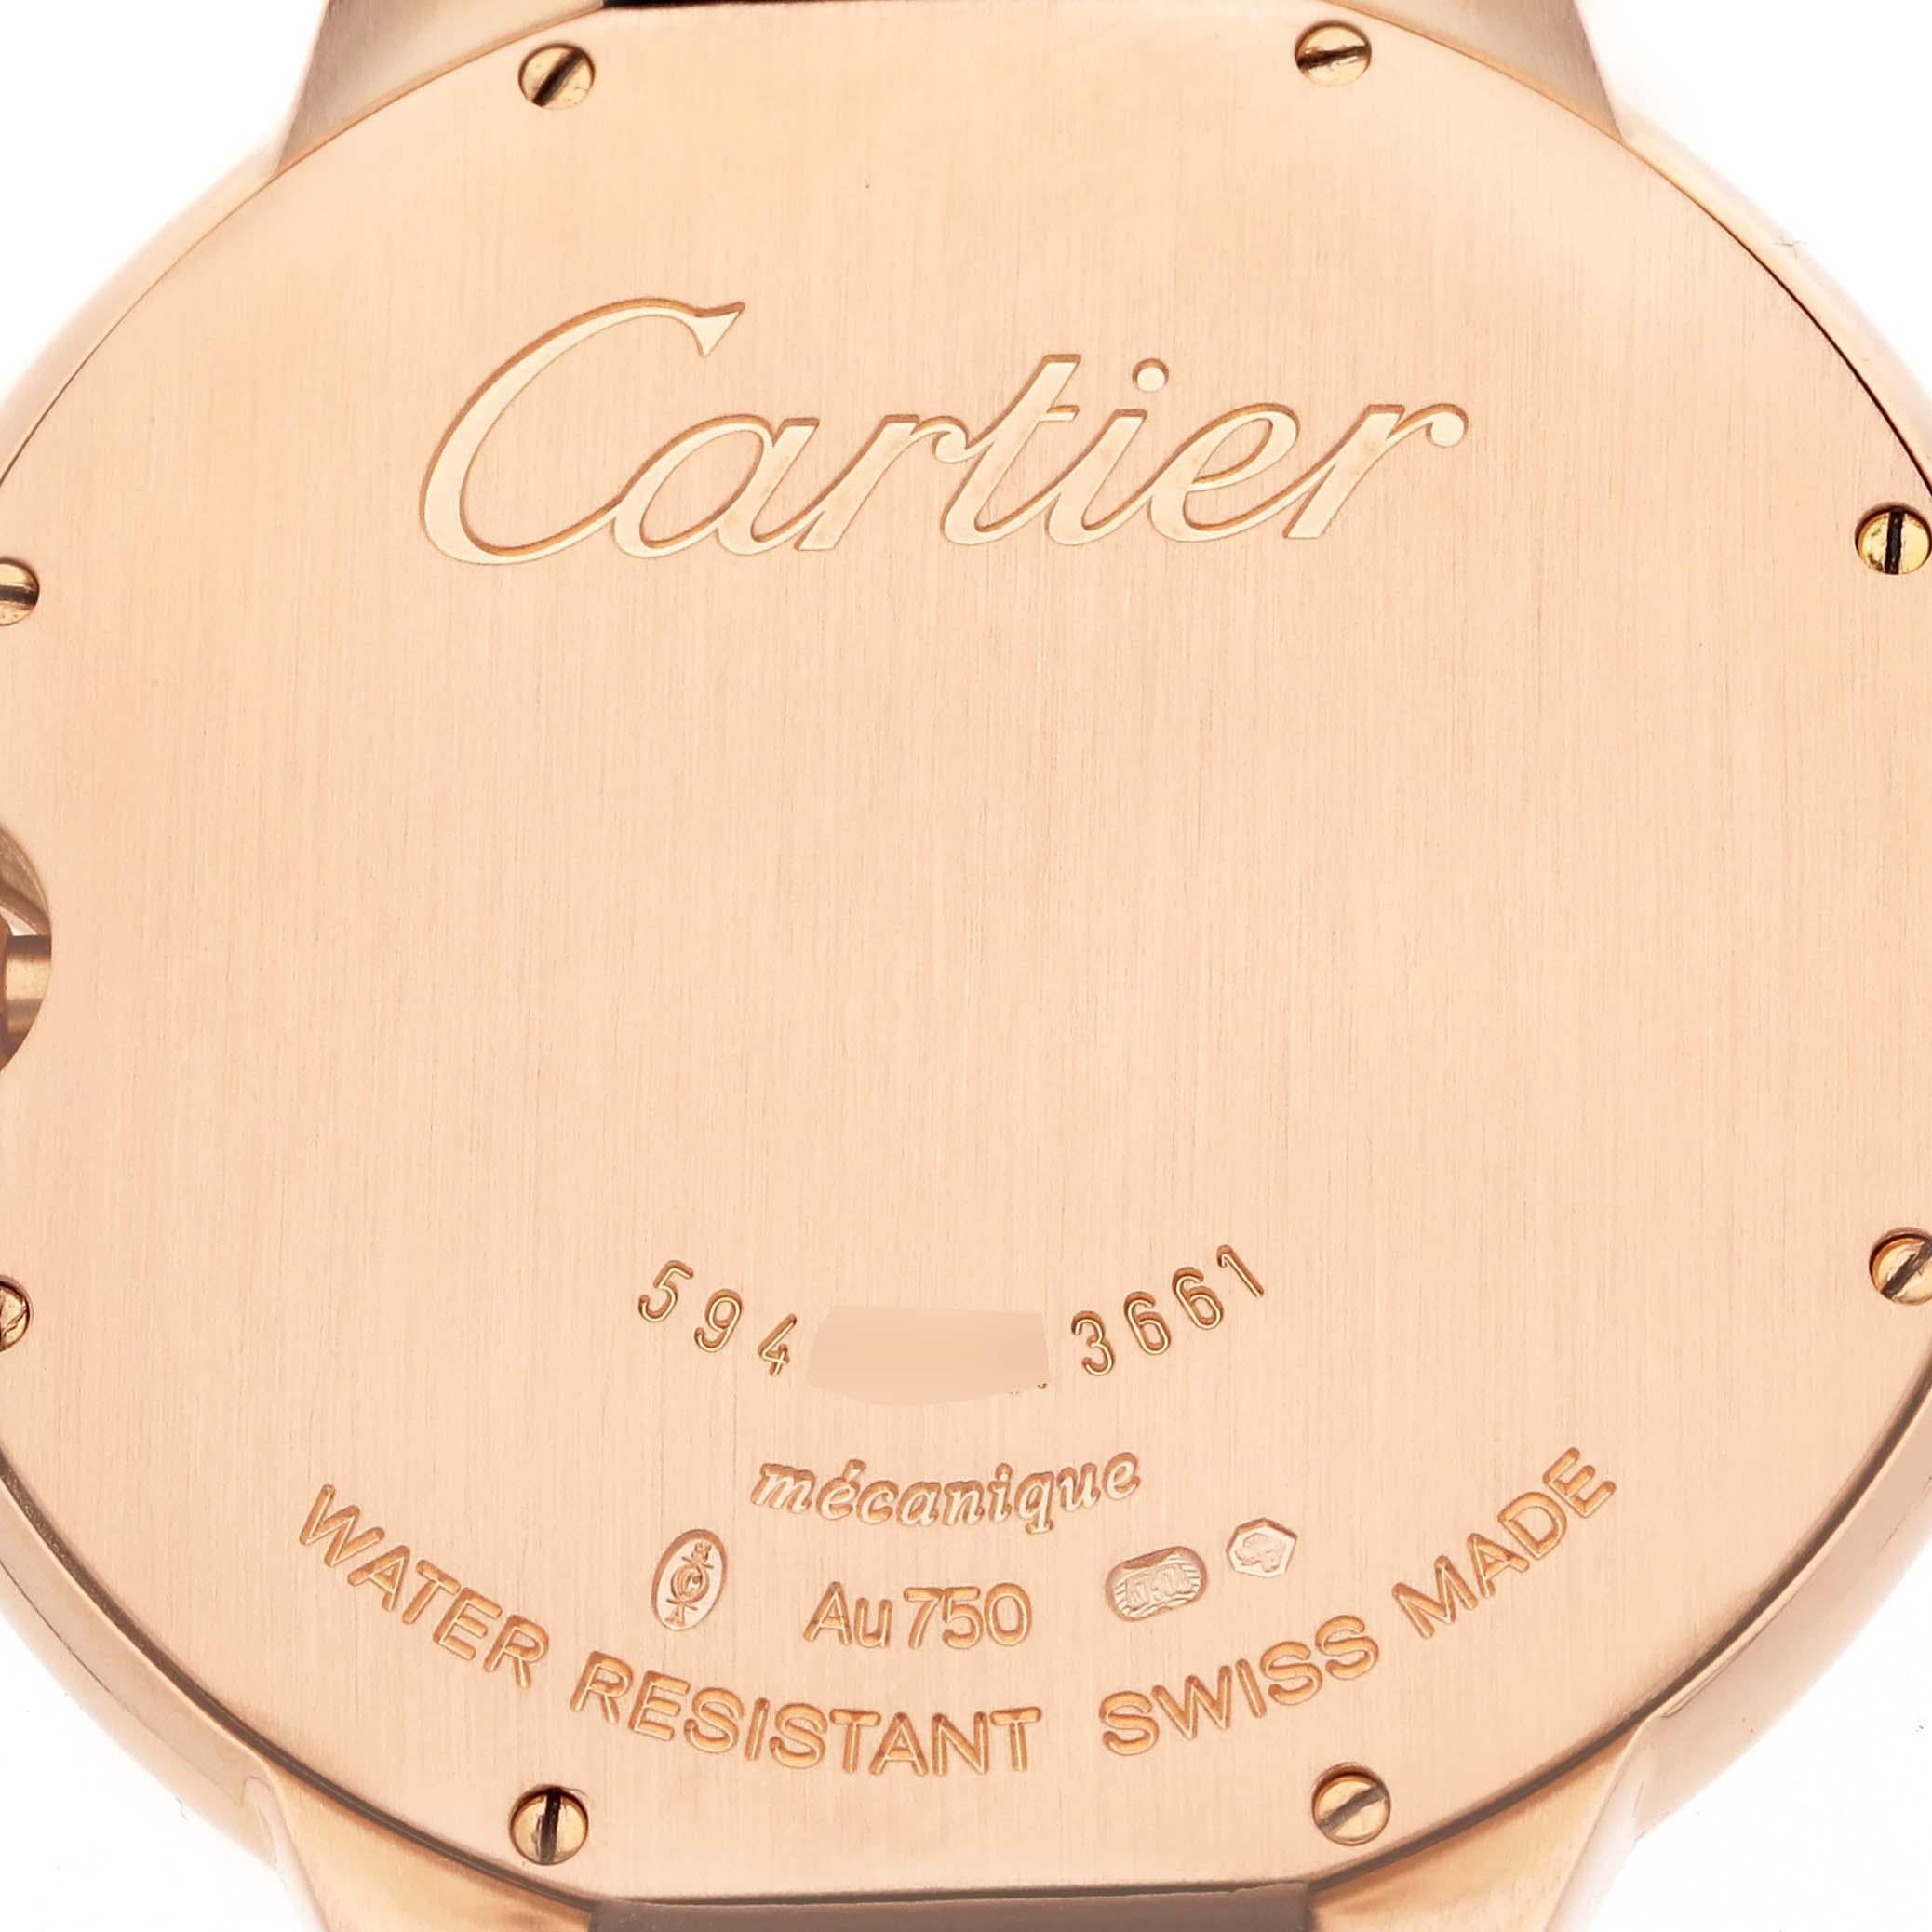 Cartier Ballon Bleu Rose Gold Mens Watch W6920083. Manual winding movement. 18K rose gold case 40.0 mm in diameter. Fluted crown set with a blue sapphire cabochon. 18K rose gold smooth bezel. Scratch resistant sapphire crystal. Silver guilloche dial